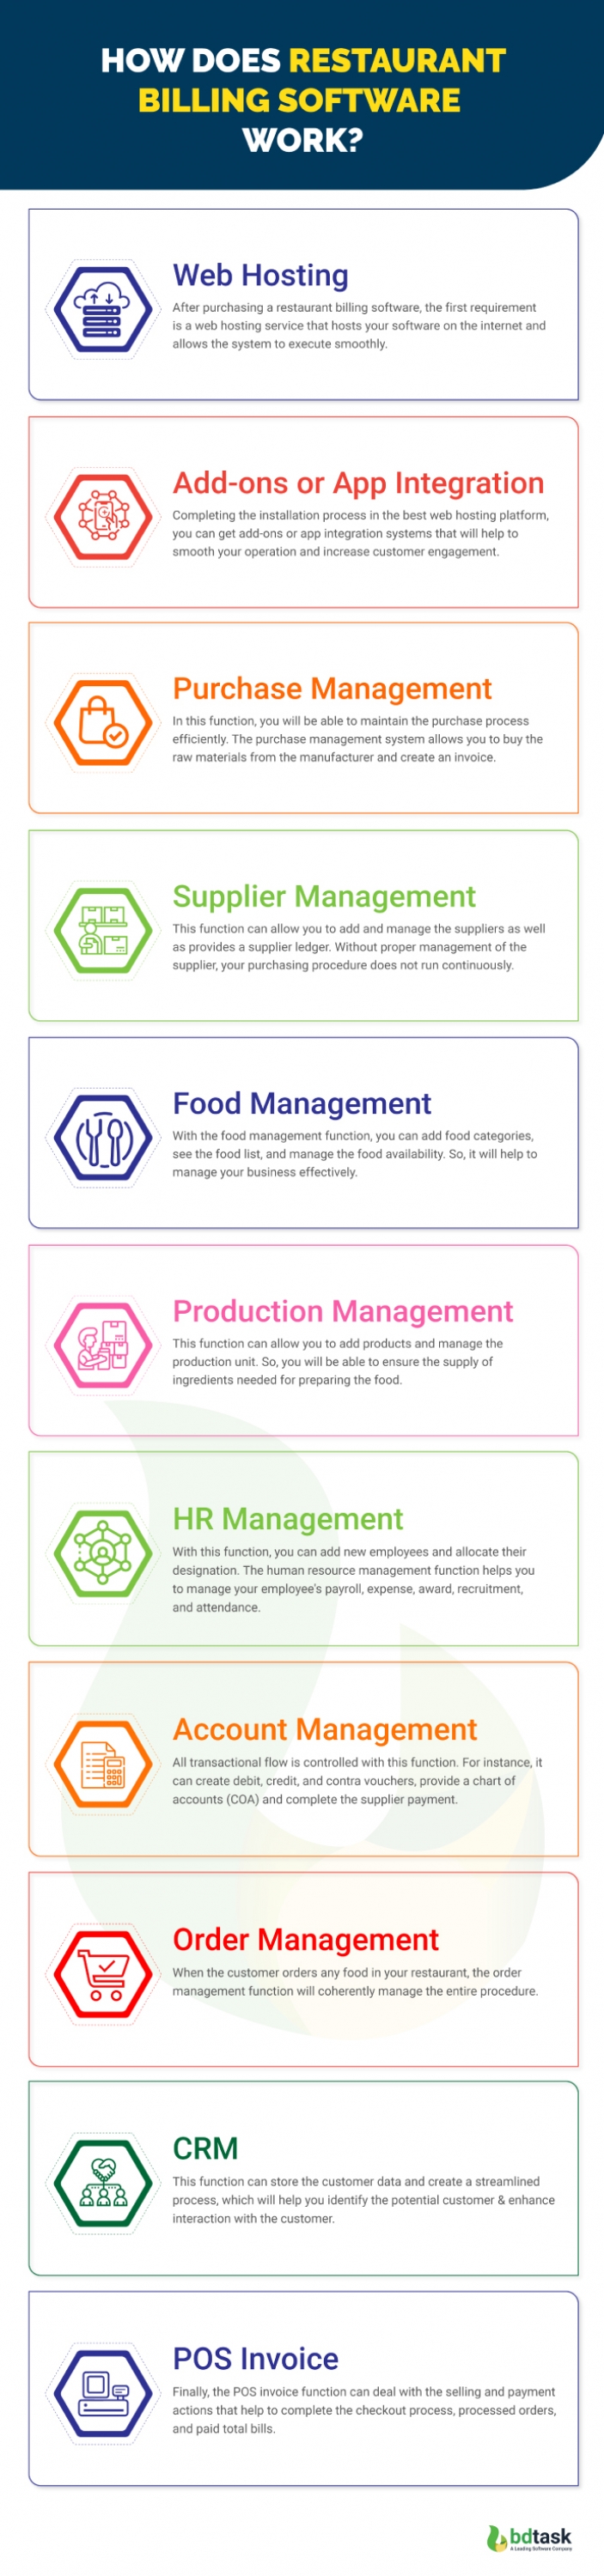 How Does Restaurant Billing Software Work Infographic